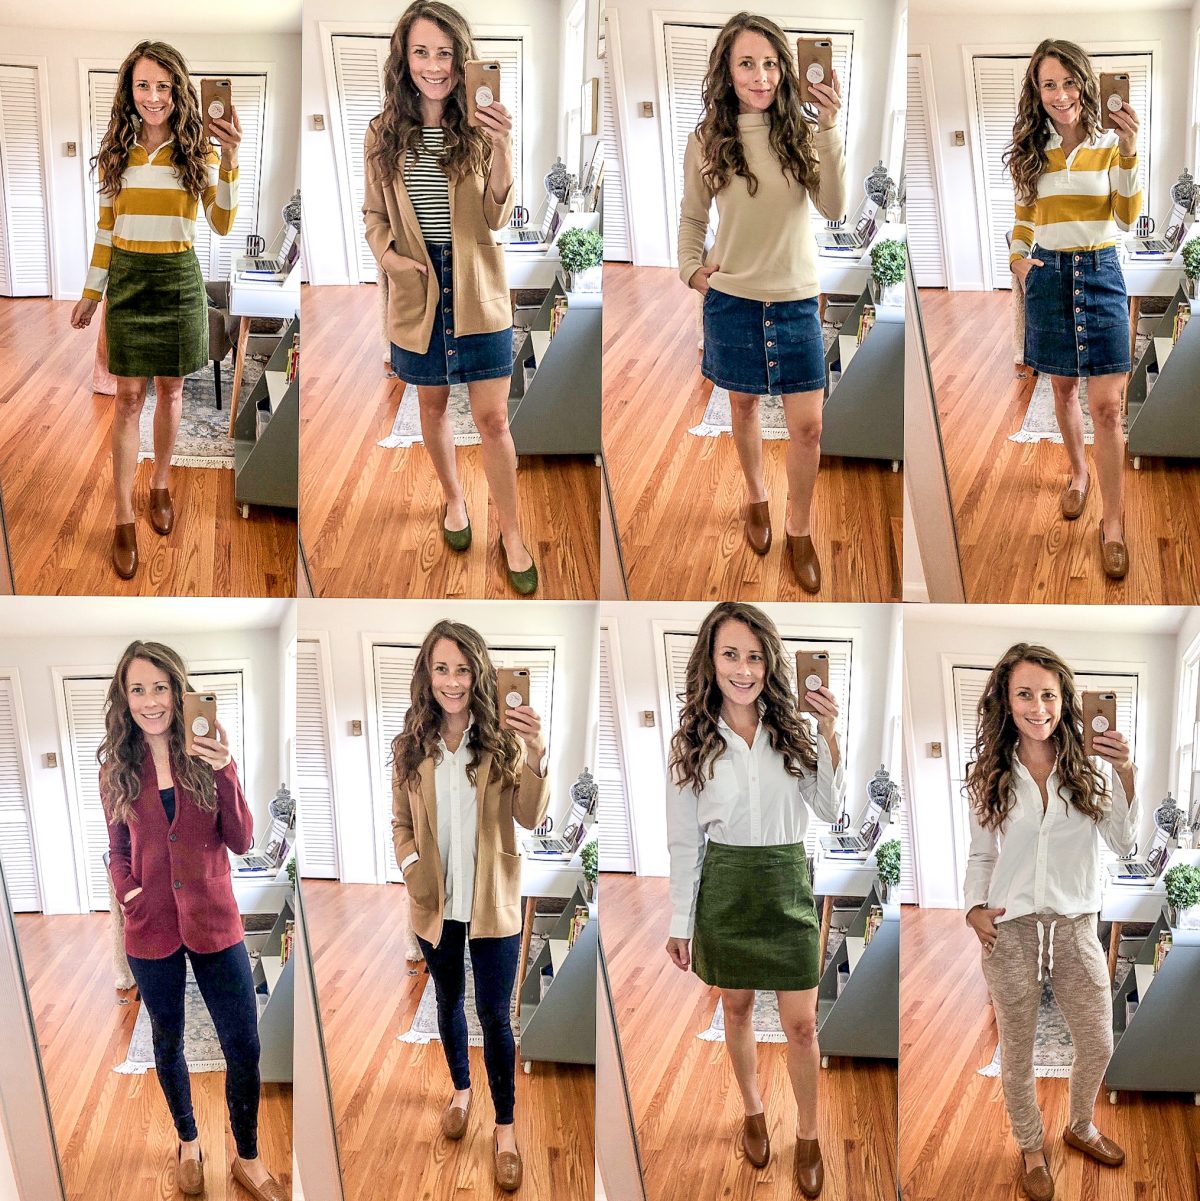 Fall Style 2019 | September Style Session with Jean Skirt, Corduroy Skirt, Sweater Blazer, and White Button Up